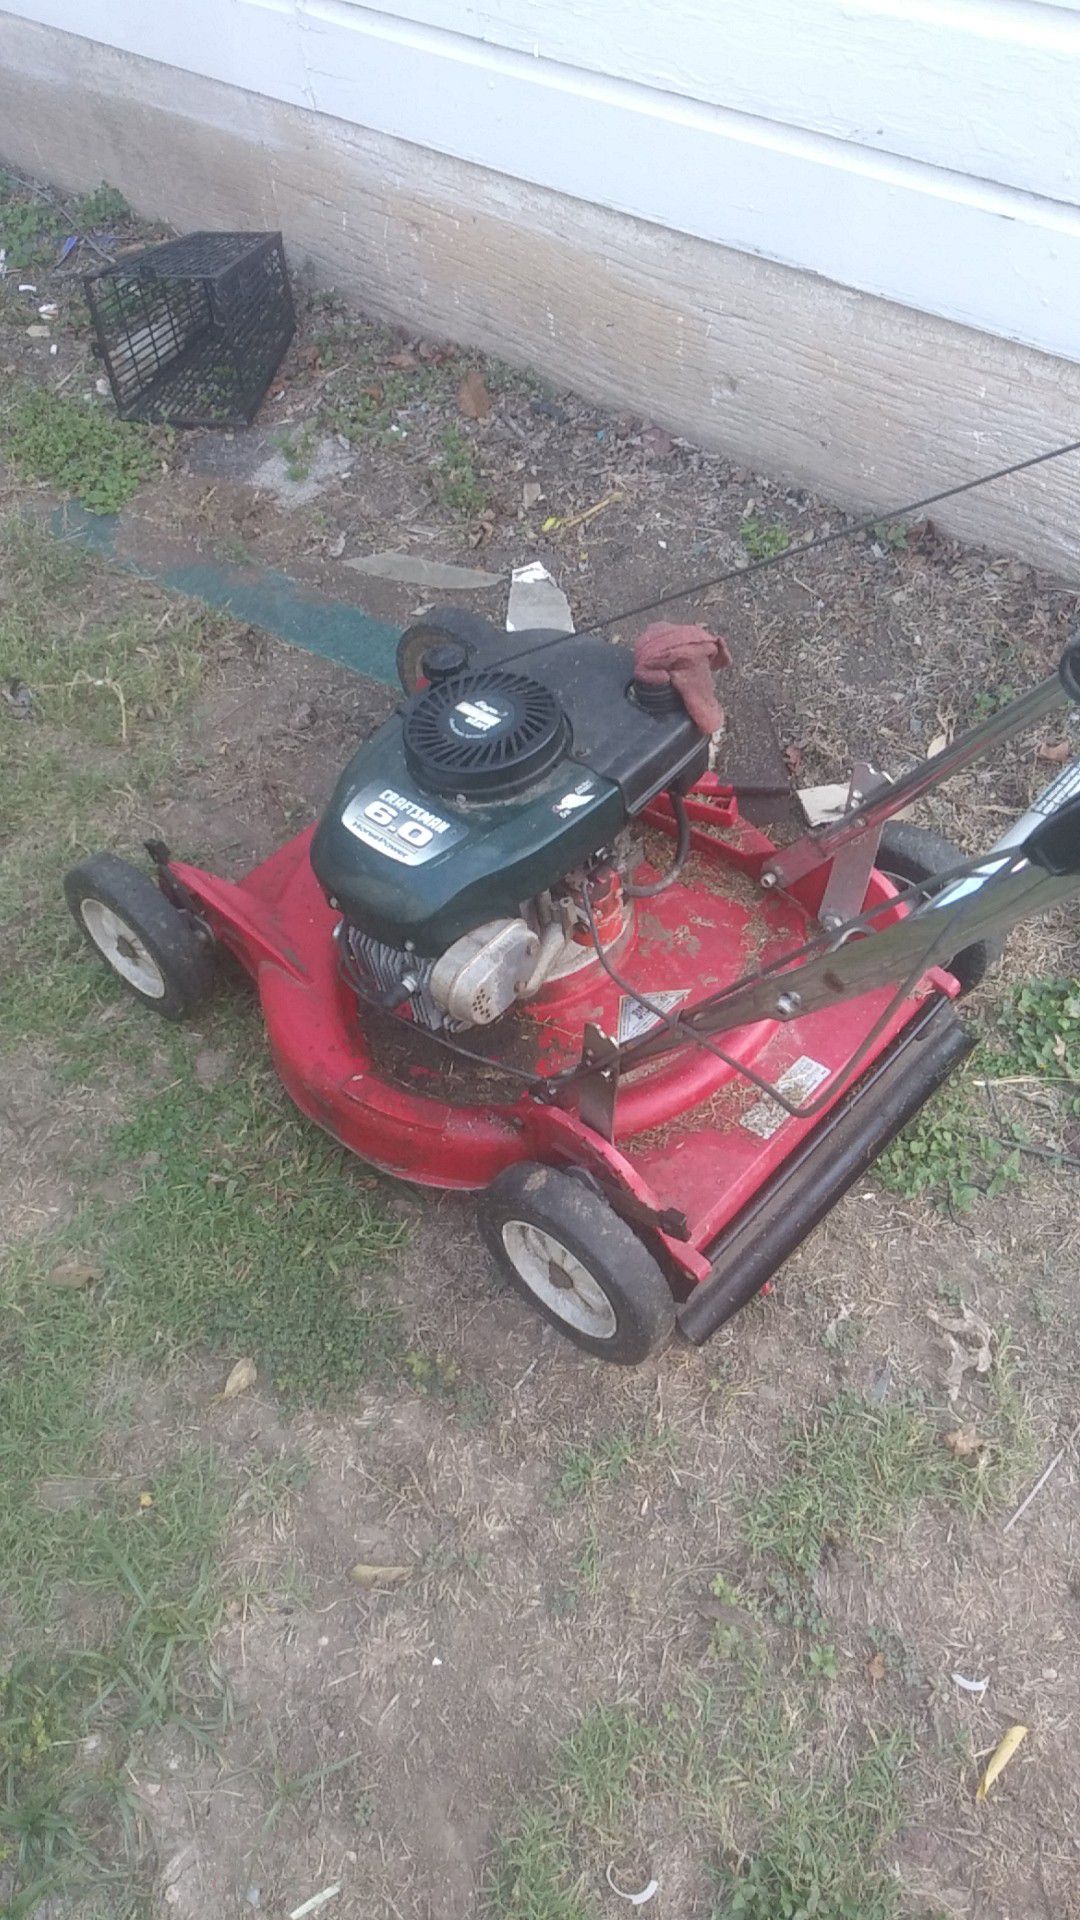 Old Craftsman lawn mower it still runs gas leaked out the carburetor